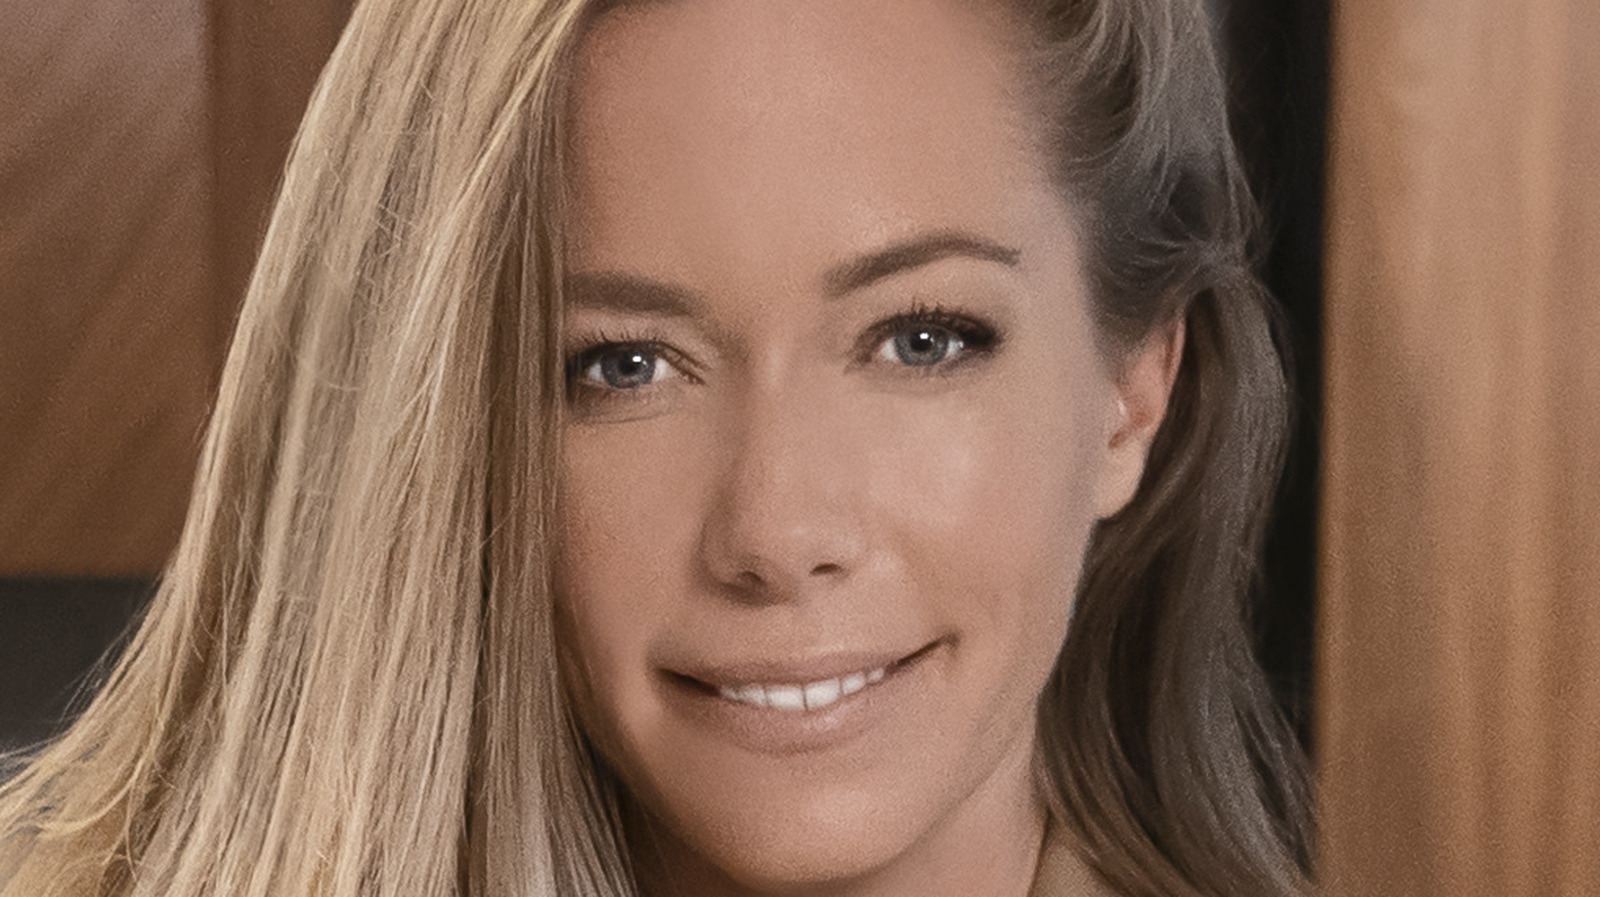 Why Girls Next Door's Kendra Wilkinson Became A Real Estate Agent